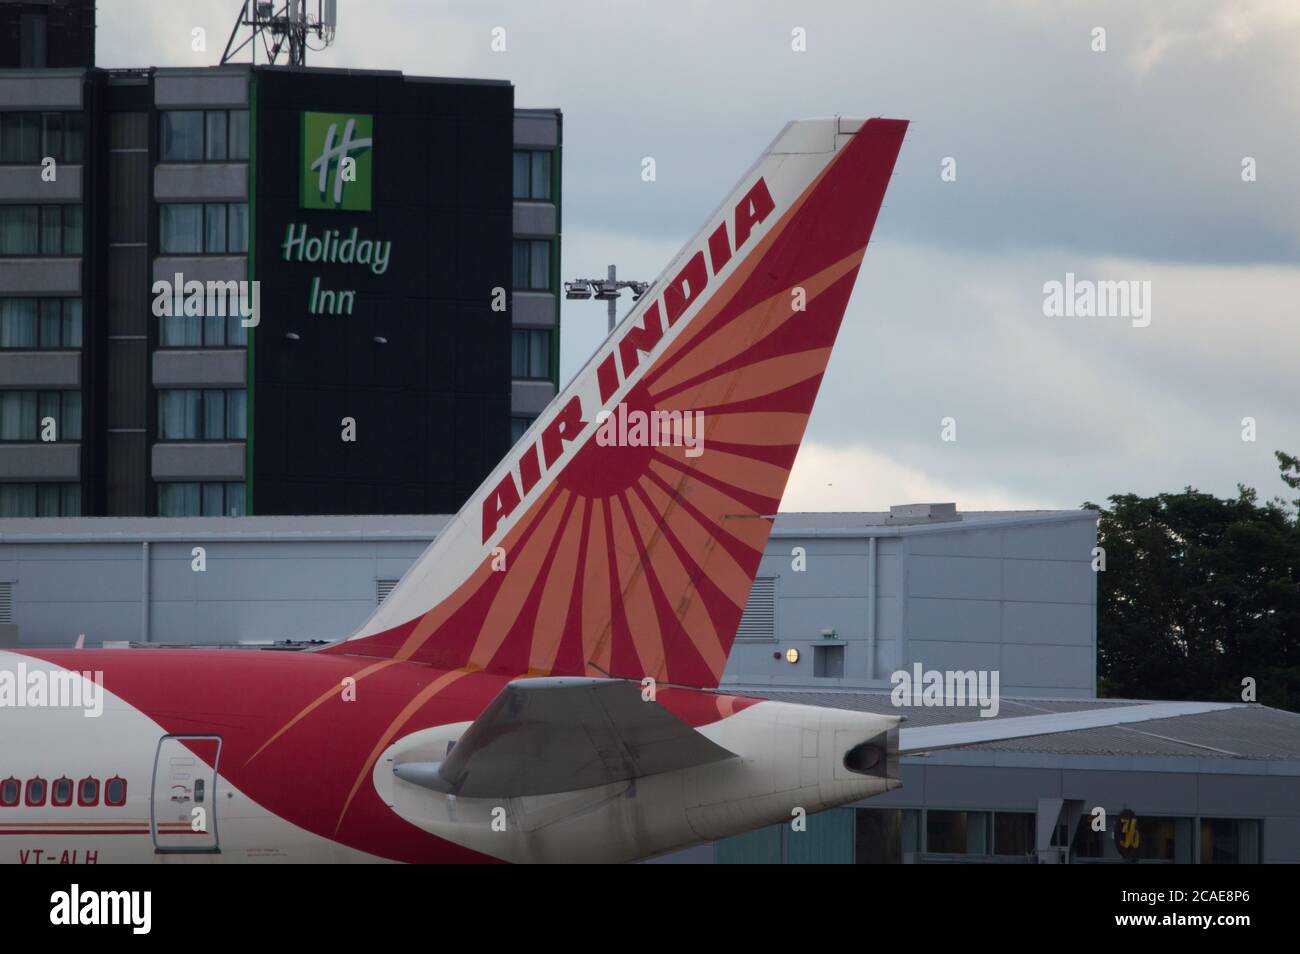 Glasgow, Scotland, UK. 6th Aug, 2020. Pictured: Air India Flight AI1133 from Mumbai lands at Glasgow International Airport transporting a film crew and cast which already disembarked the plane earlier. The film crew who landed last night are to be quarantined for 14 days before starting filming in Ayrshire later this month with Bollywood blockbuster, Bell Bottom, where it's reported the 80s' thriller revolves around a plane hijacking. The plane is a Boeing 777-237(LR) aircraft. Credit: Colin Fisher/Alamy Live News Stock Photo